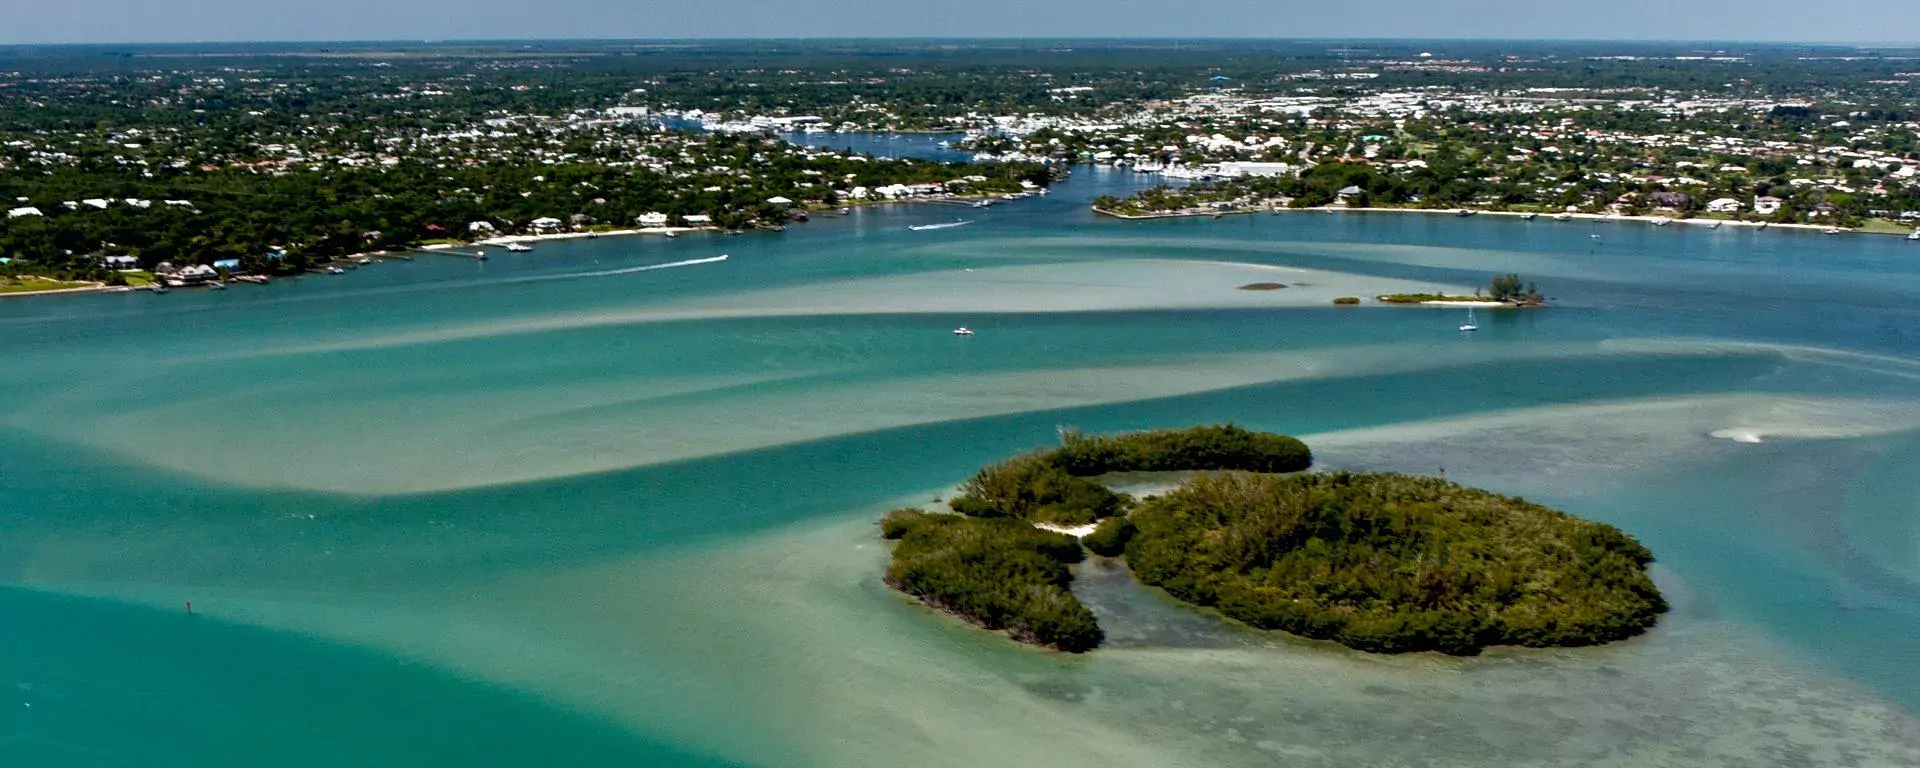 St. Lucie River and Inlet